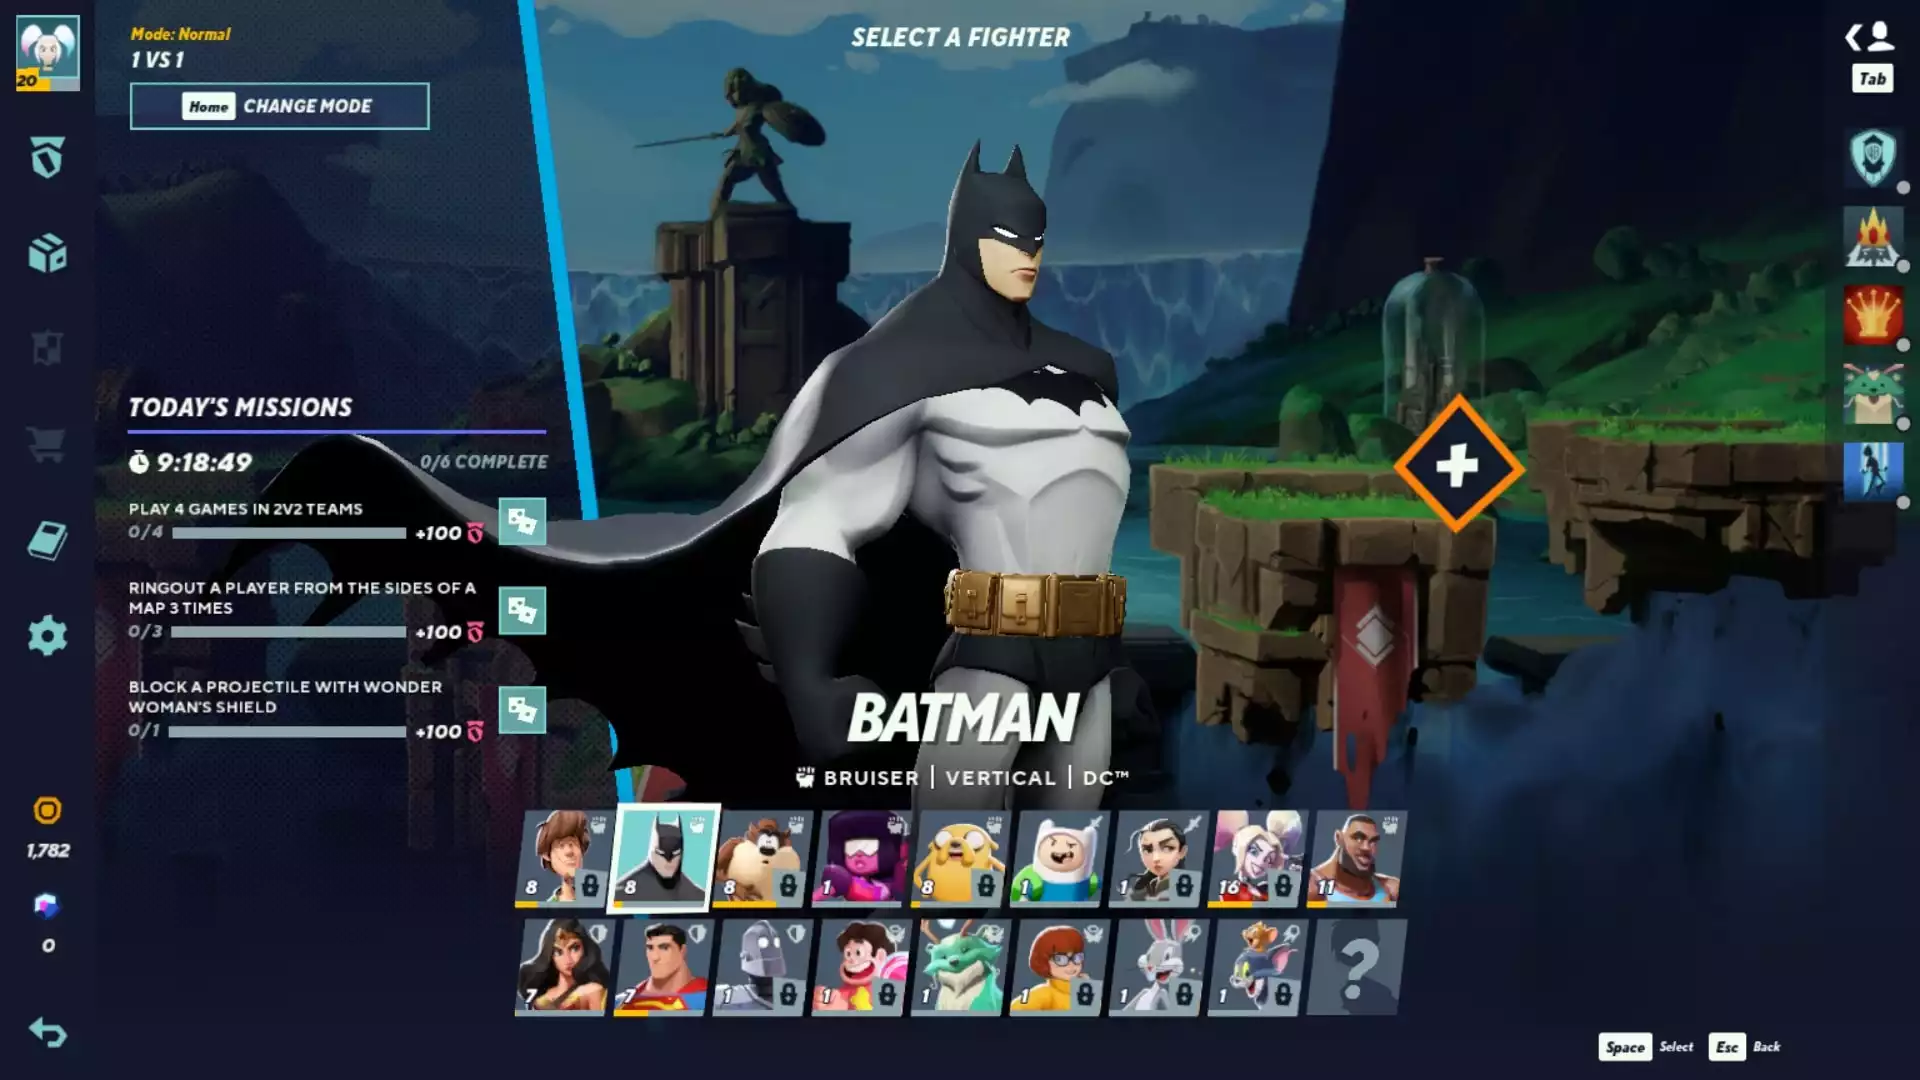 MultiVersus Batman Guide: Combos, Perks, Specials, And More